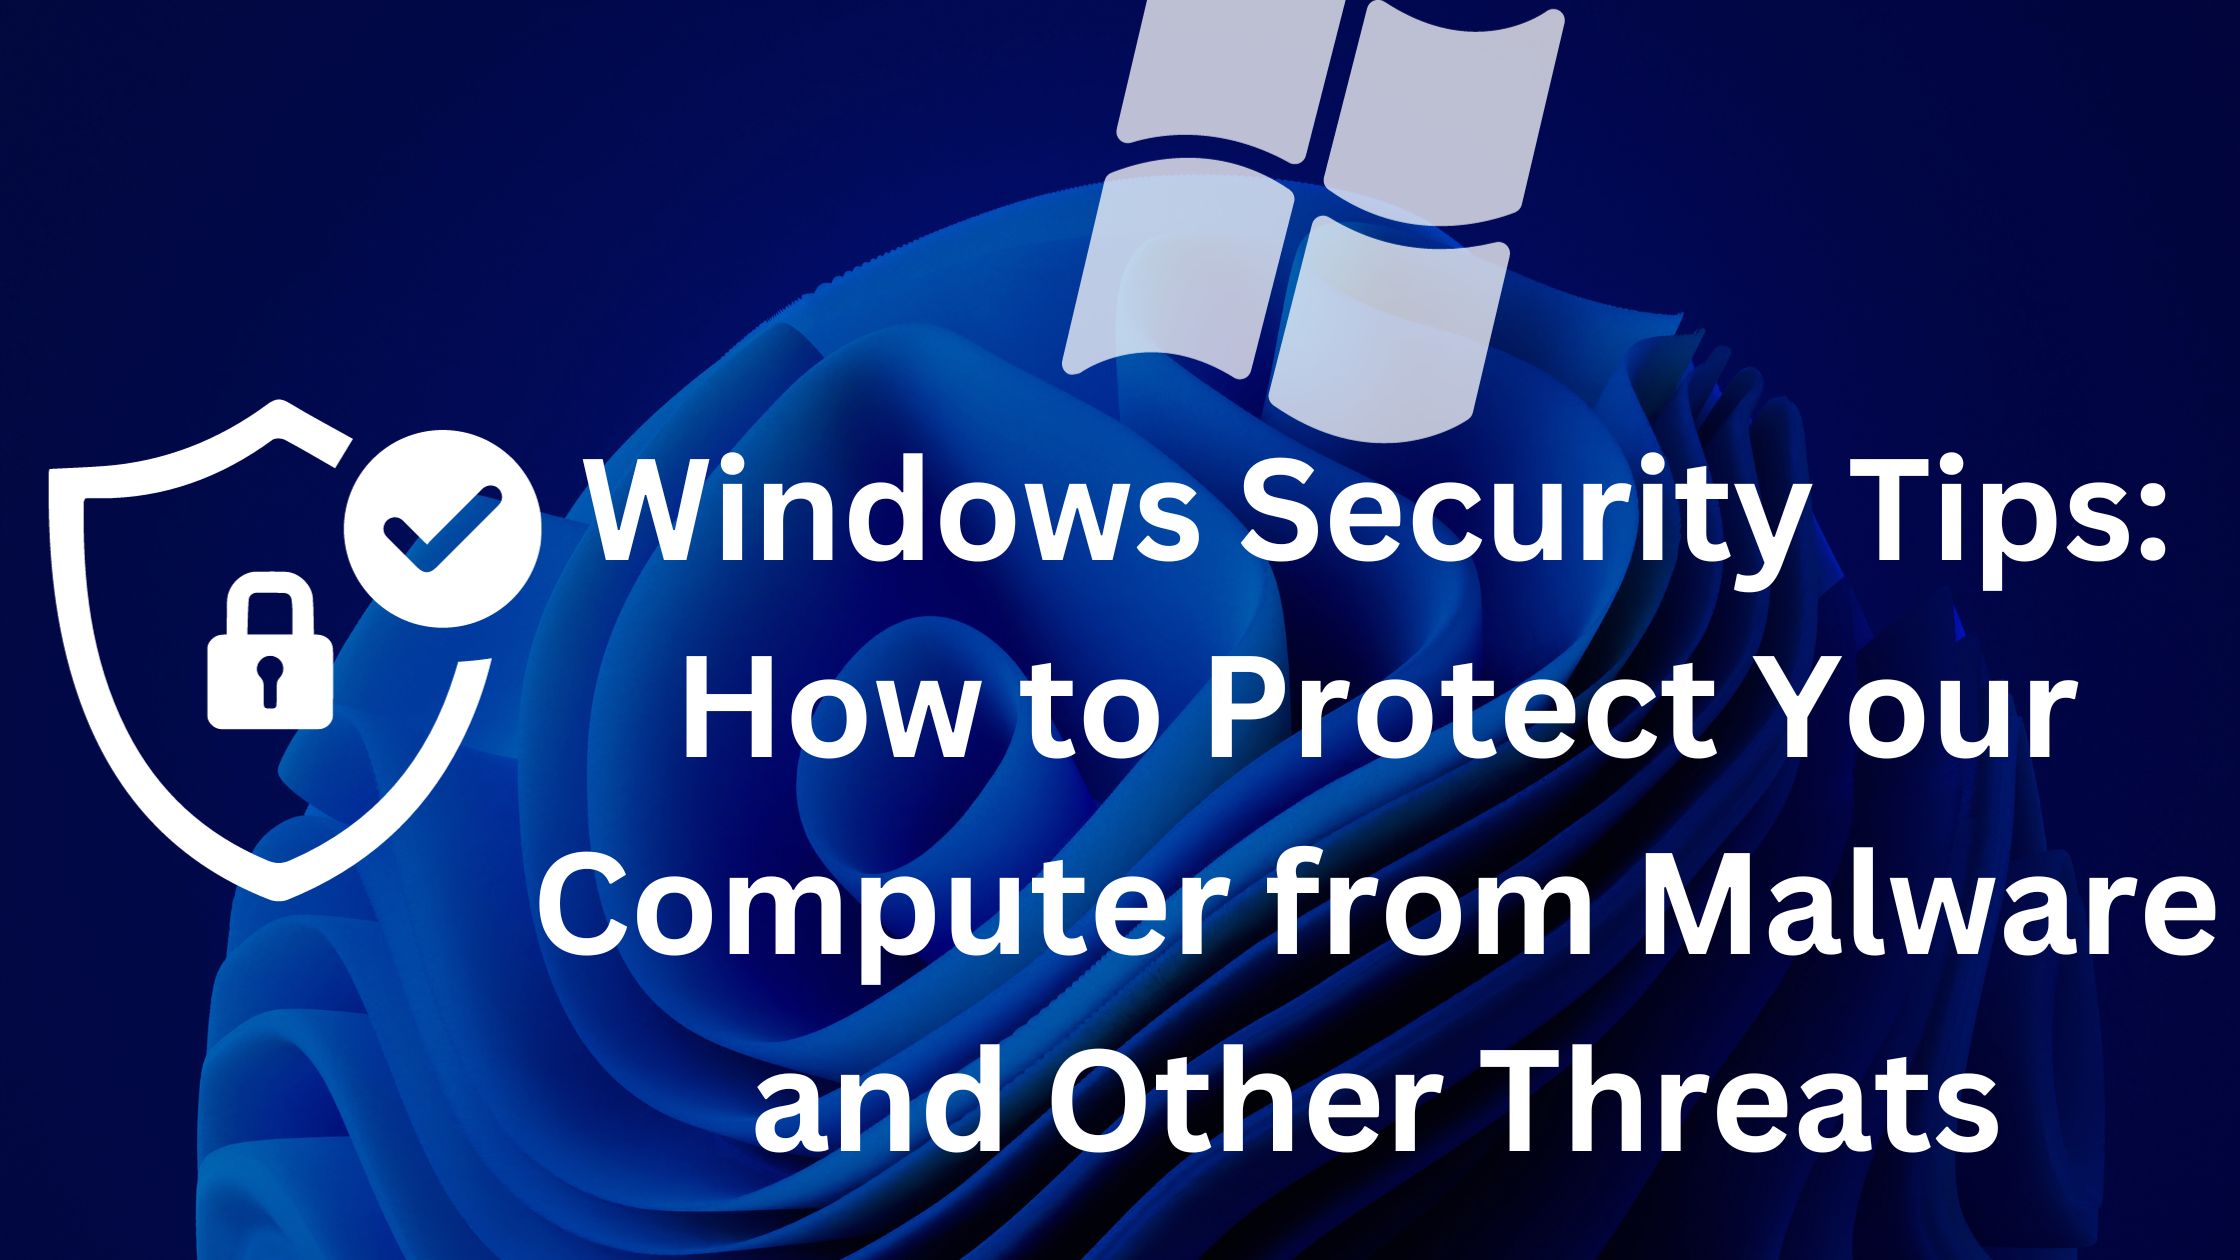 Windows Security Tips: How to Protect Your Computer from Malware and Other Threats